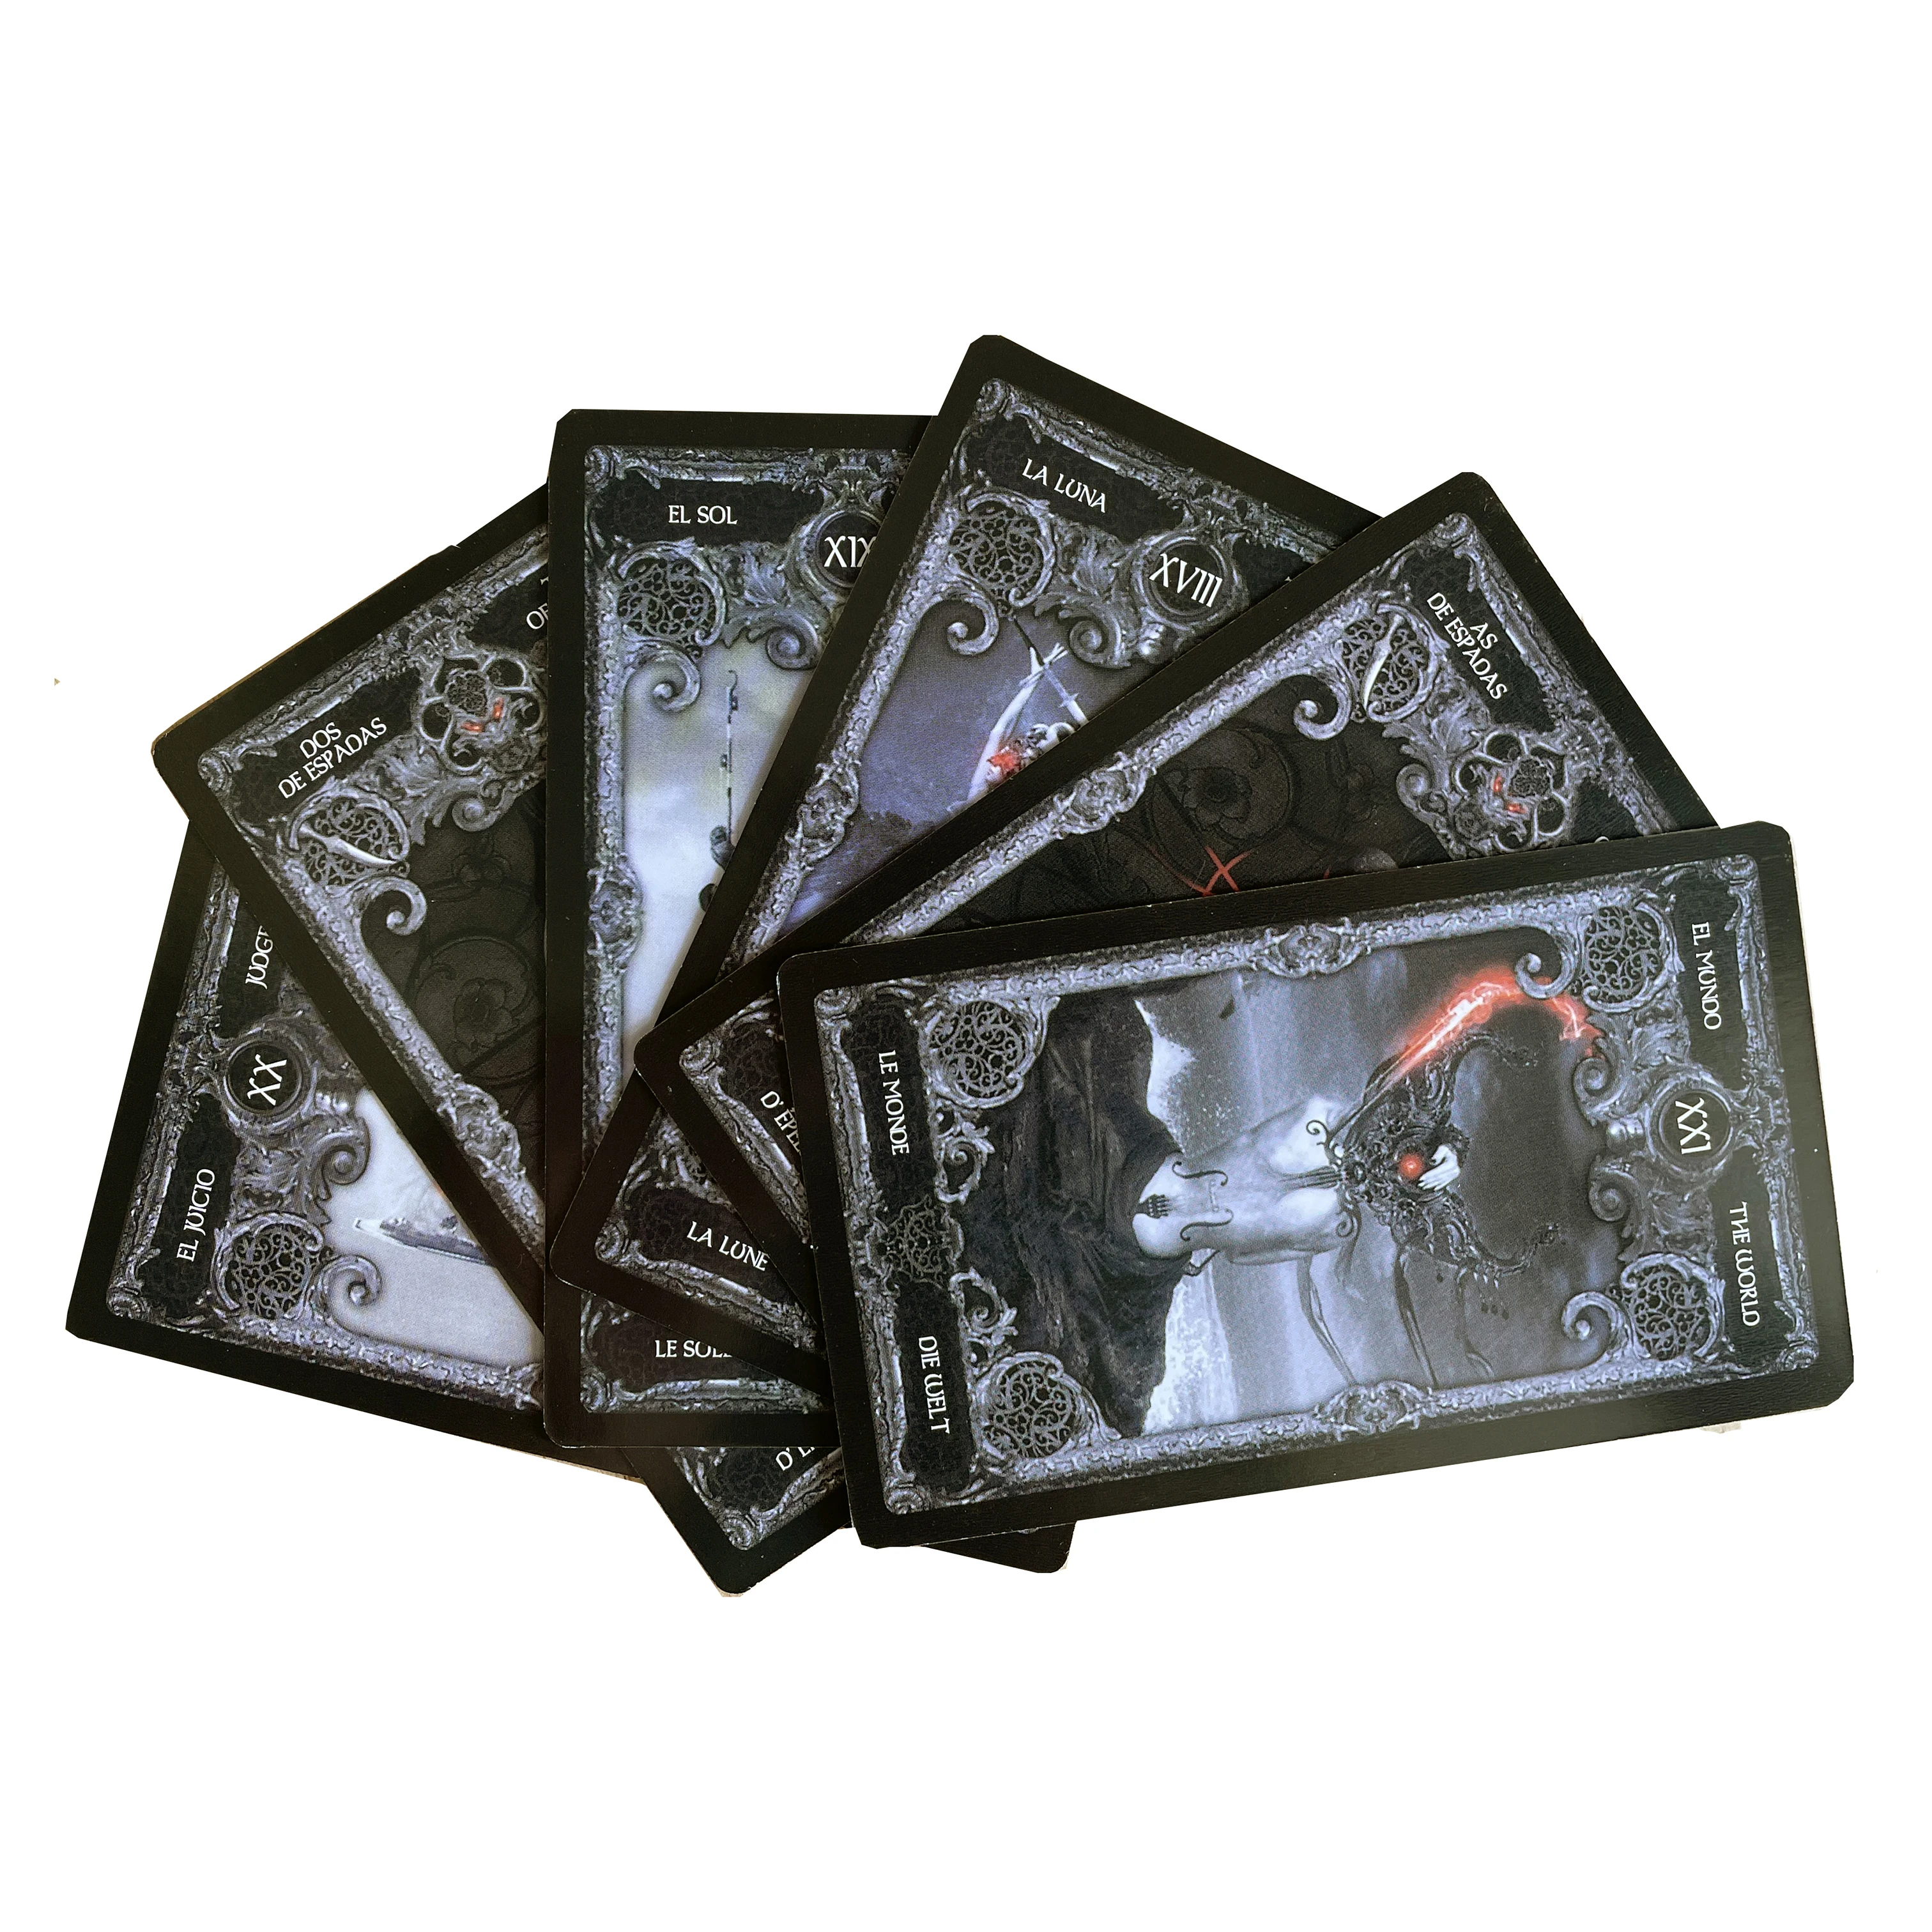 Dark tarot card deck for beginners , Unique tarot cards deck with guidebook , Full tarot decks 78 cards ,Beautiful oracle cards golden tarot cards in russian for work with guide book prophecy oracle divination deck fortune telling classic 78 cards 12x7cm